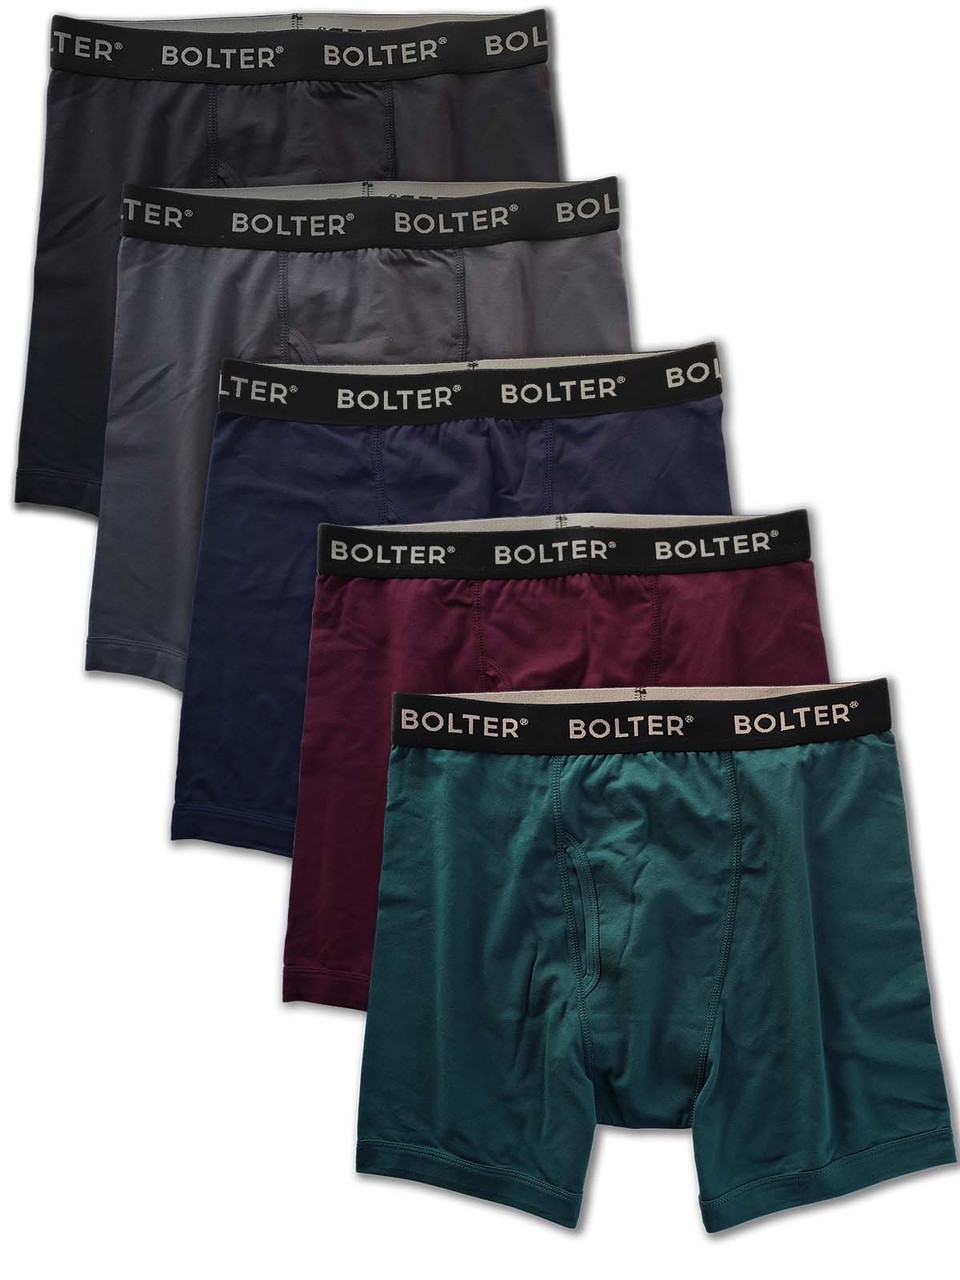 Performance Boxer Briefs - 4 Pack - Bolter